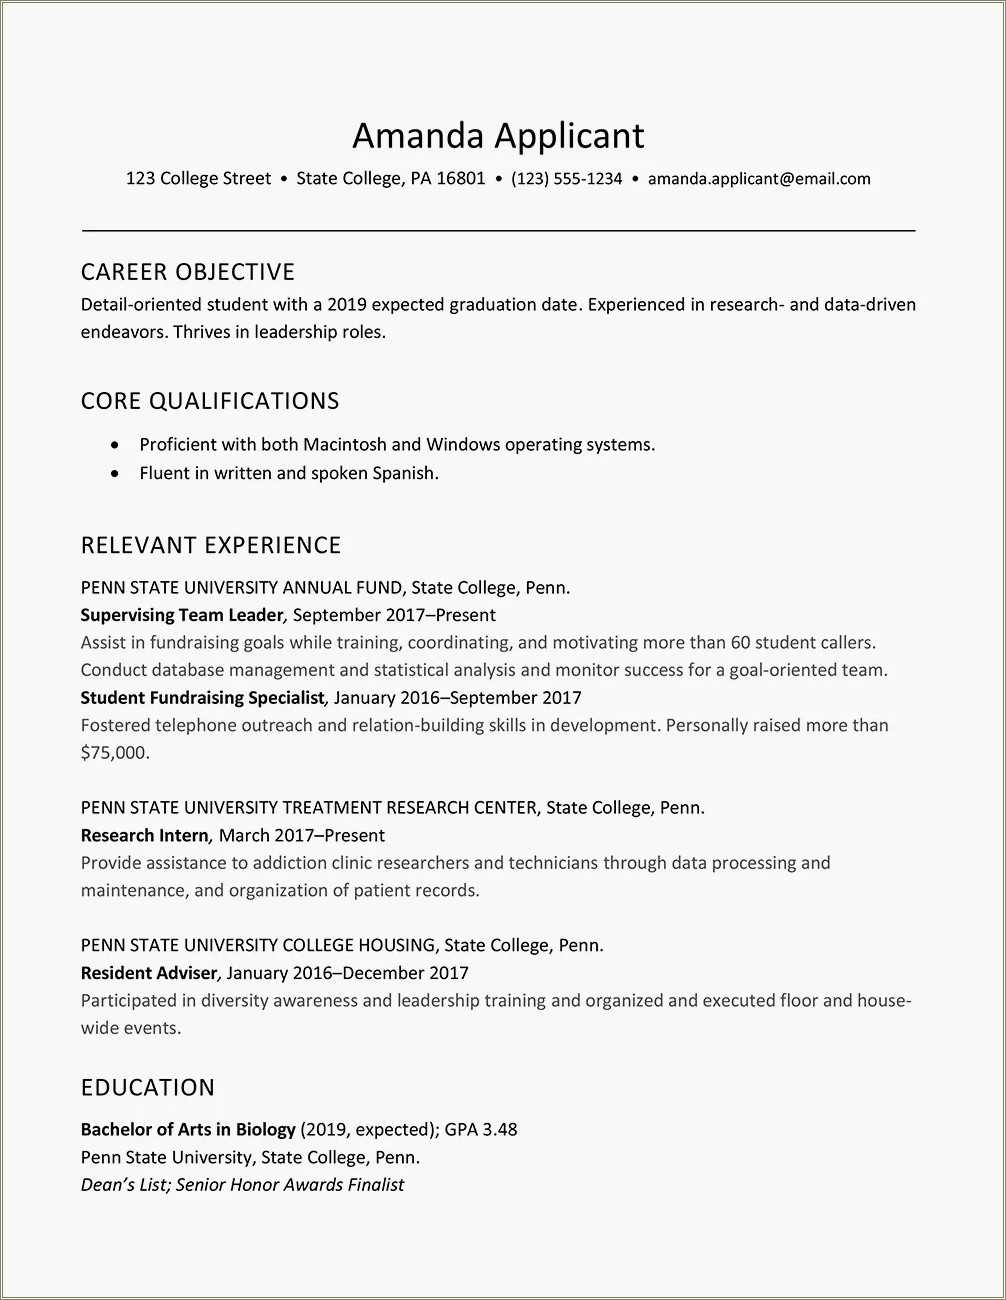 Ohio State Engineering Career Services Resume Template Resume Example